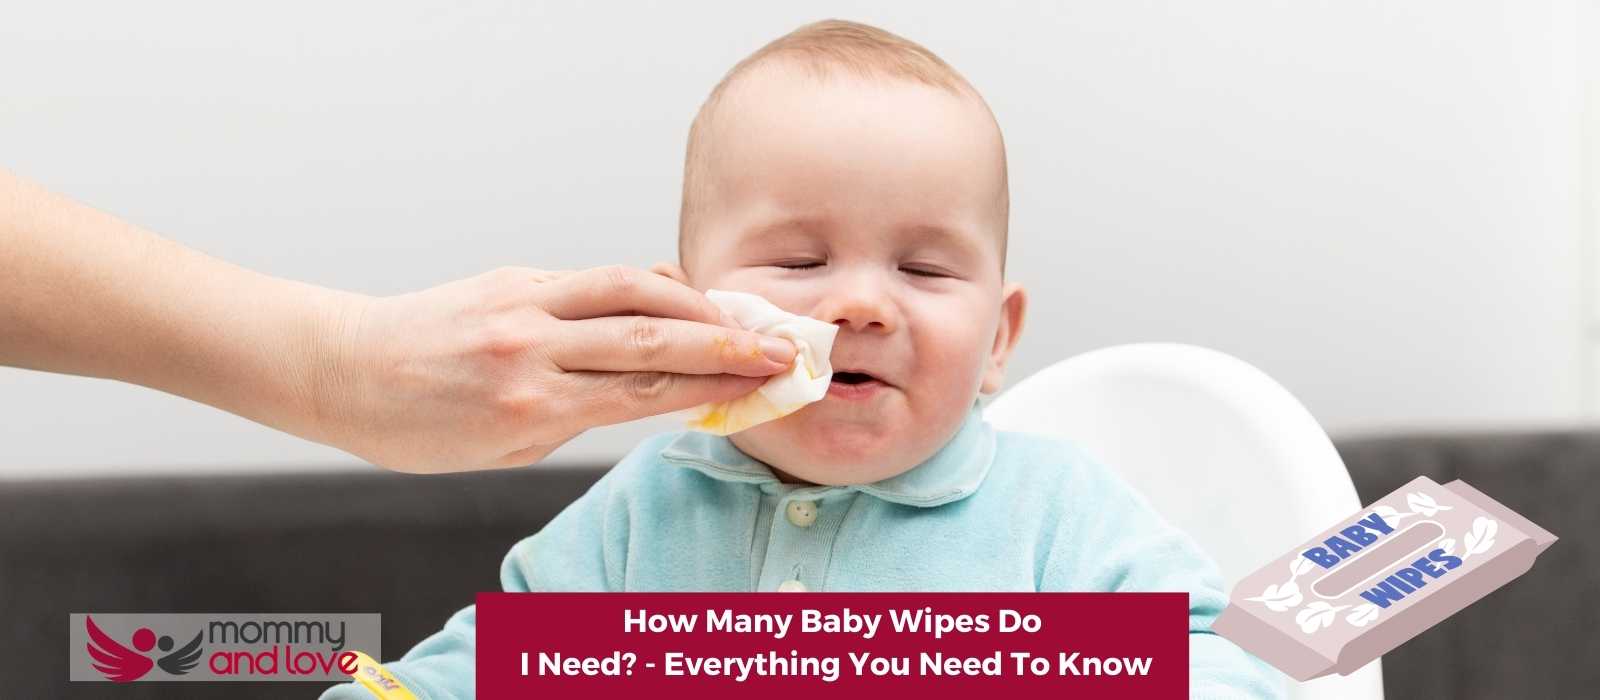 How Many Baby Wipes Do I Need - Everything You Need To Know